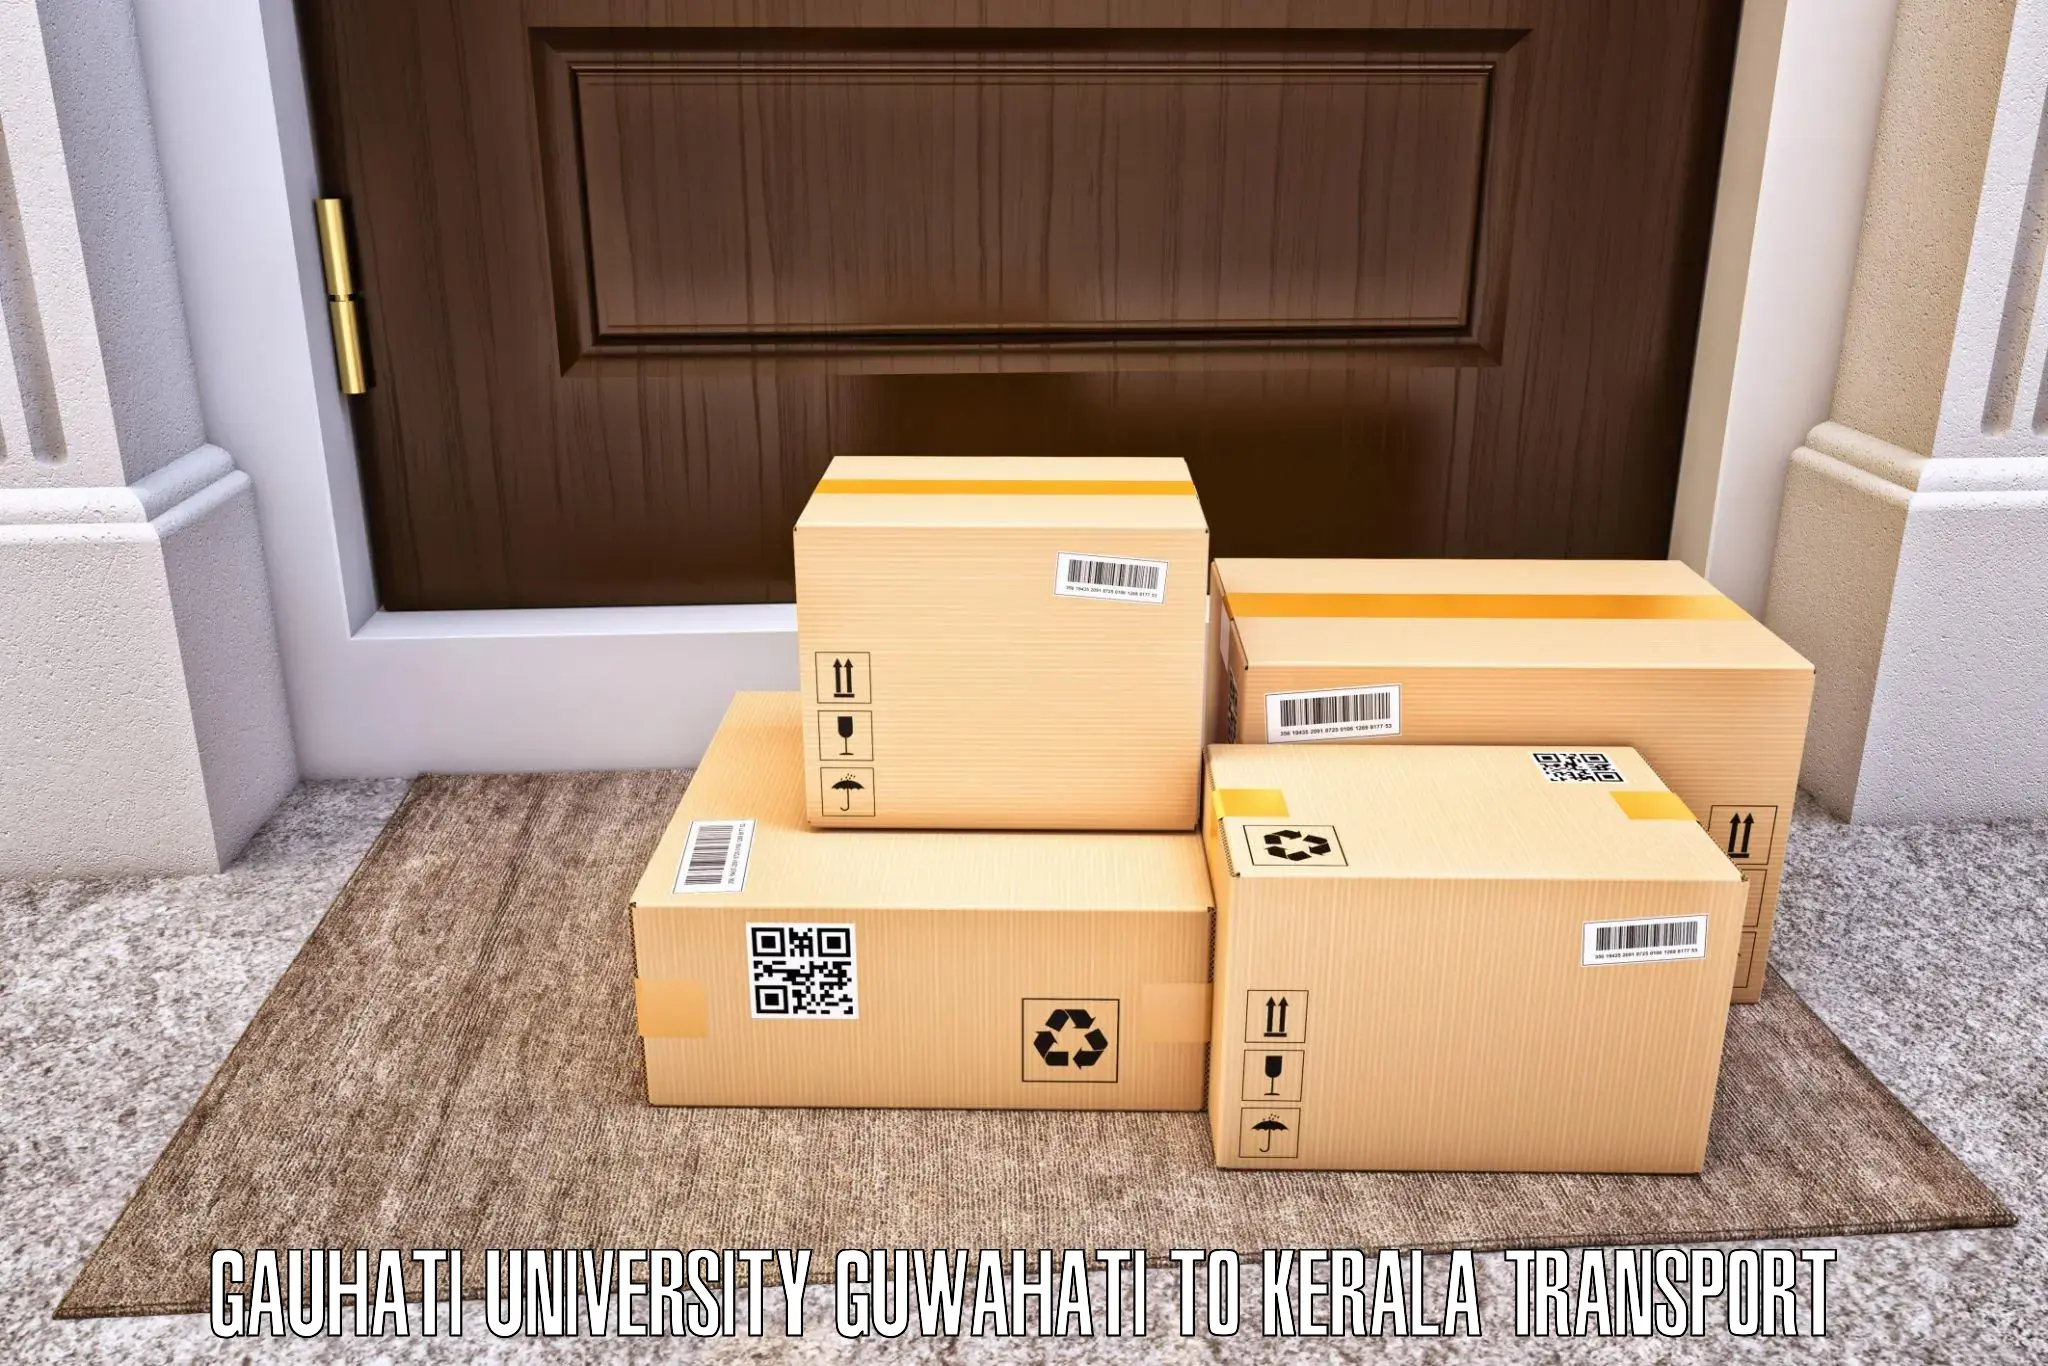 Package delivery services Gauhati University Guwahati to Kozhencherry